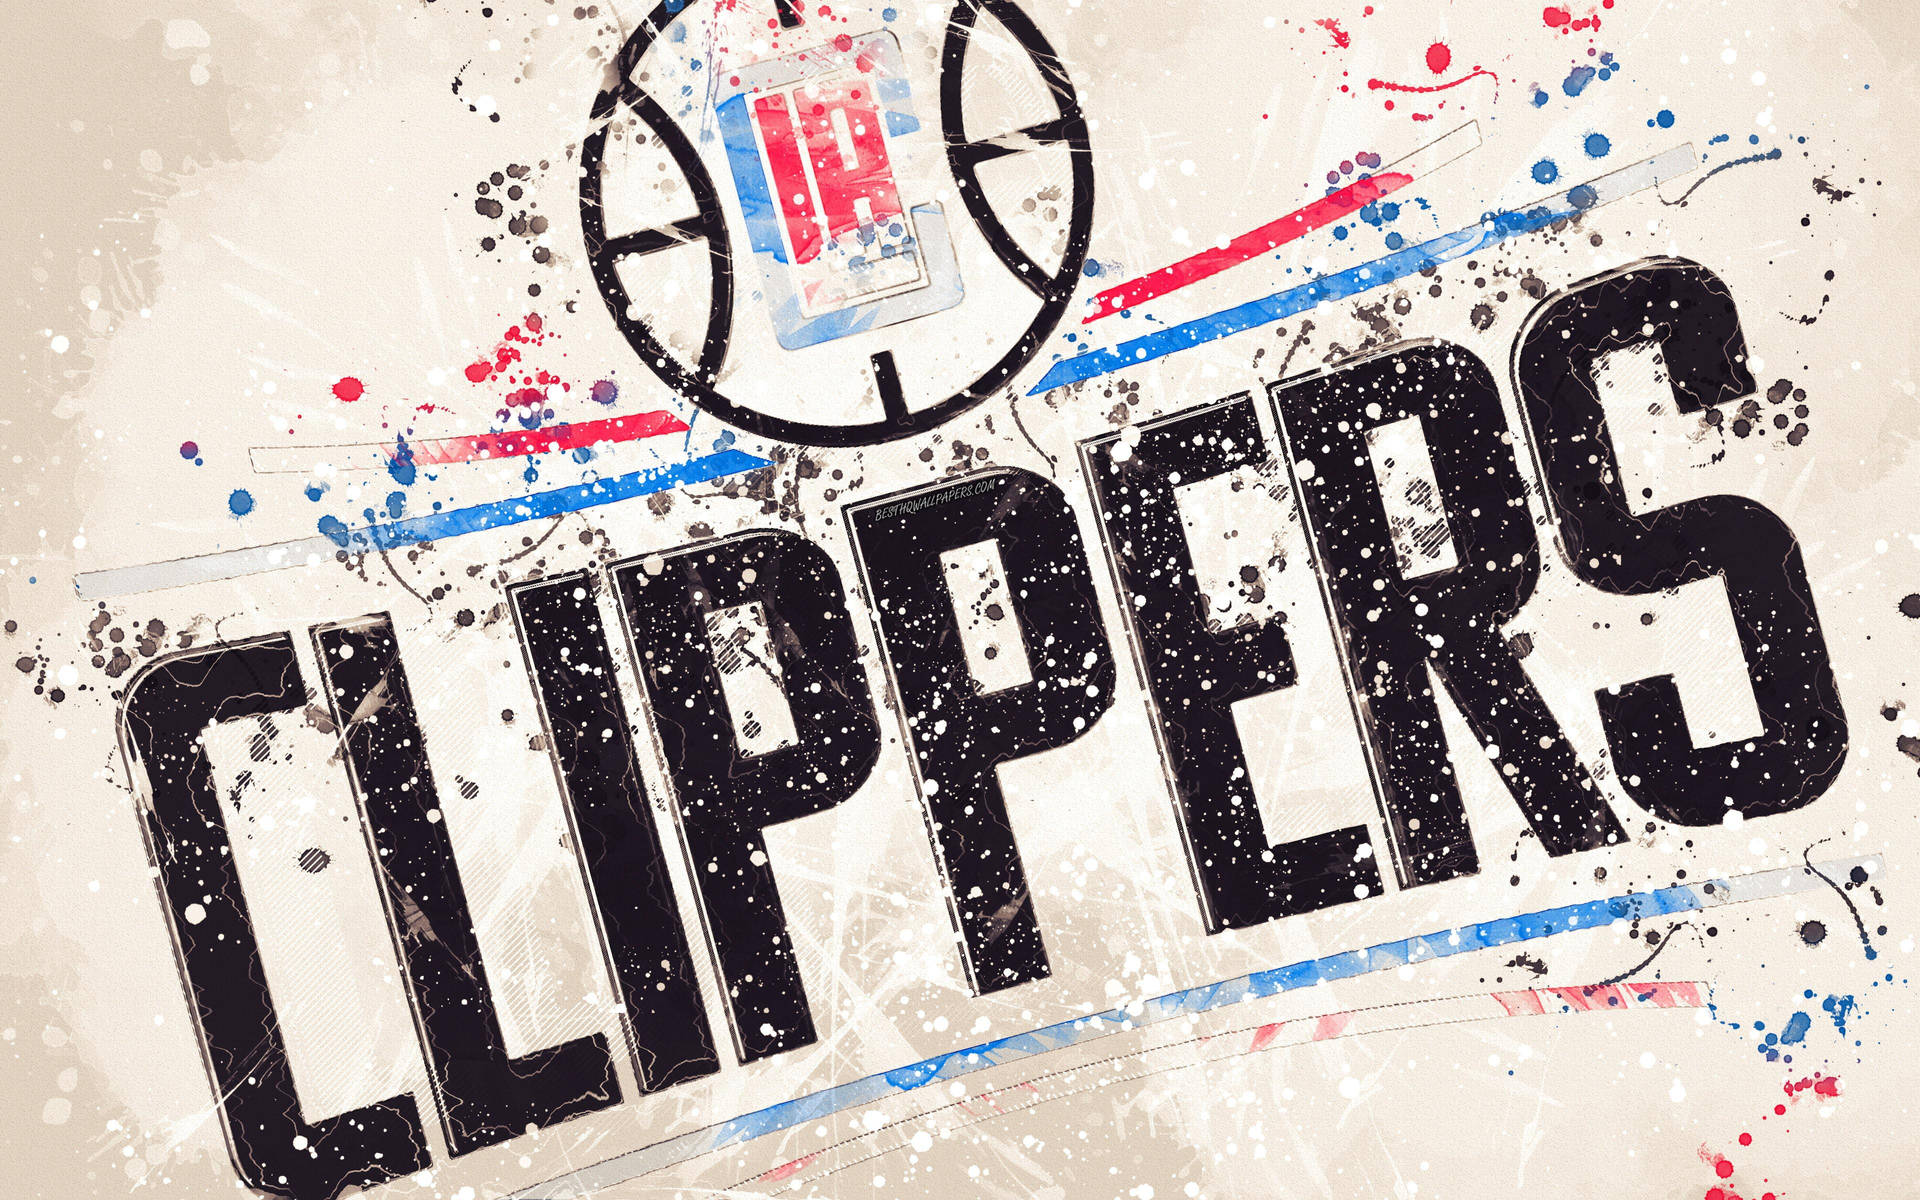 Los Angeles Clippers Paint Art Wallpaper